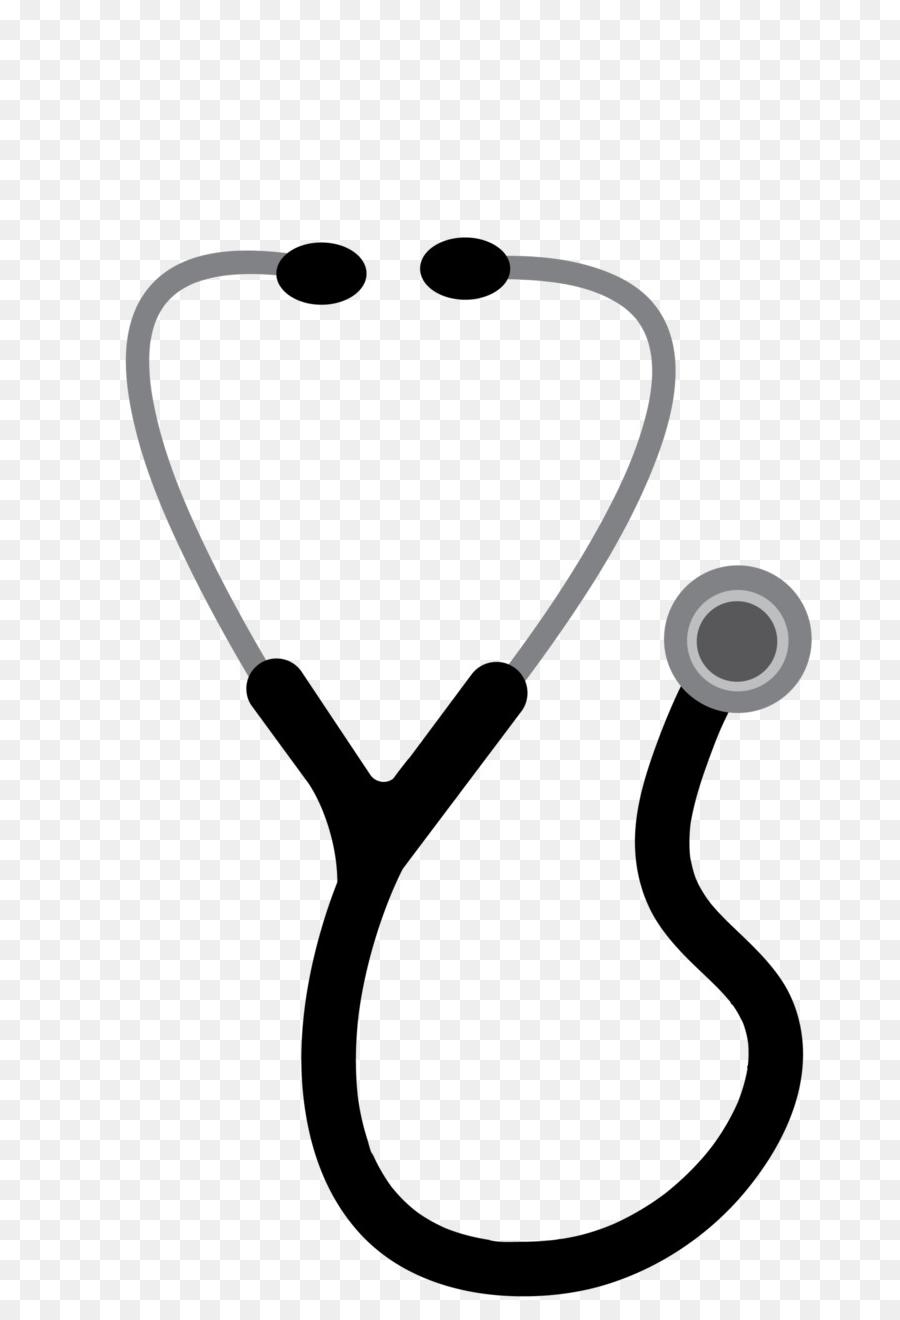 Best HD Stethoscope Clip Art Black And White Image » Free.